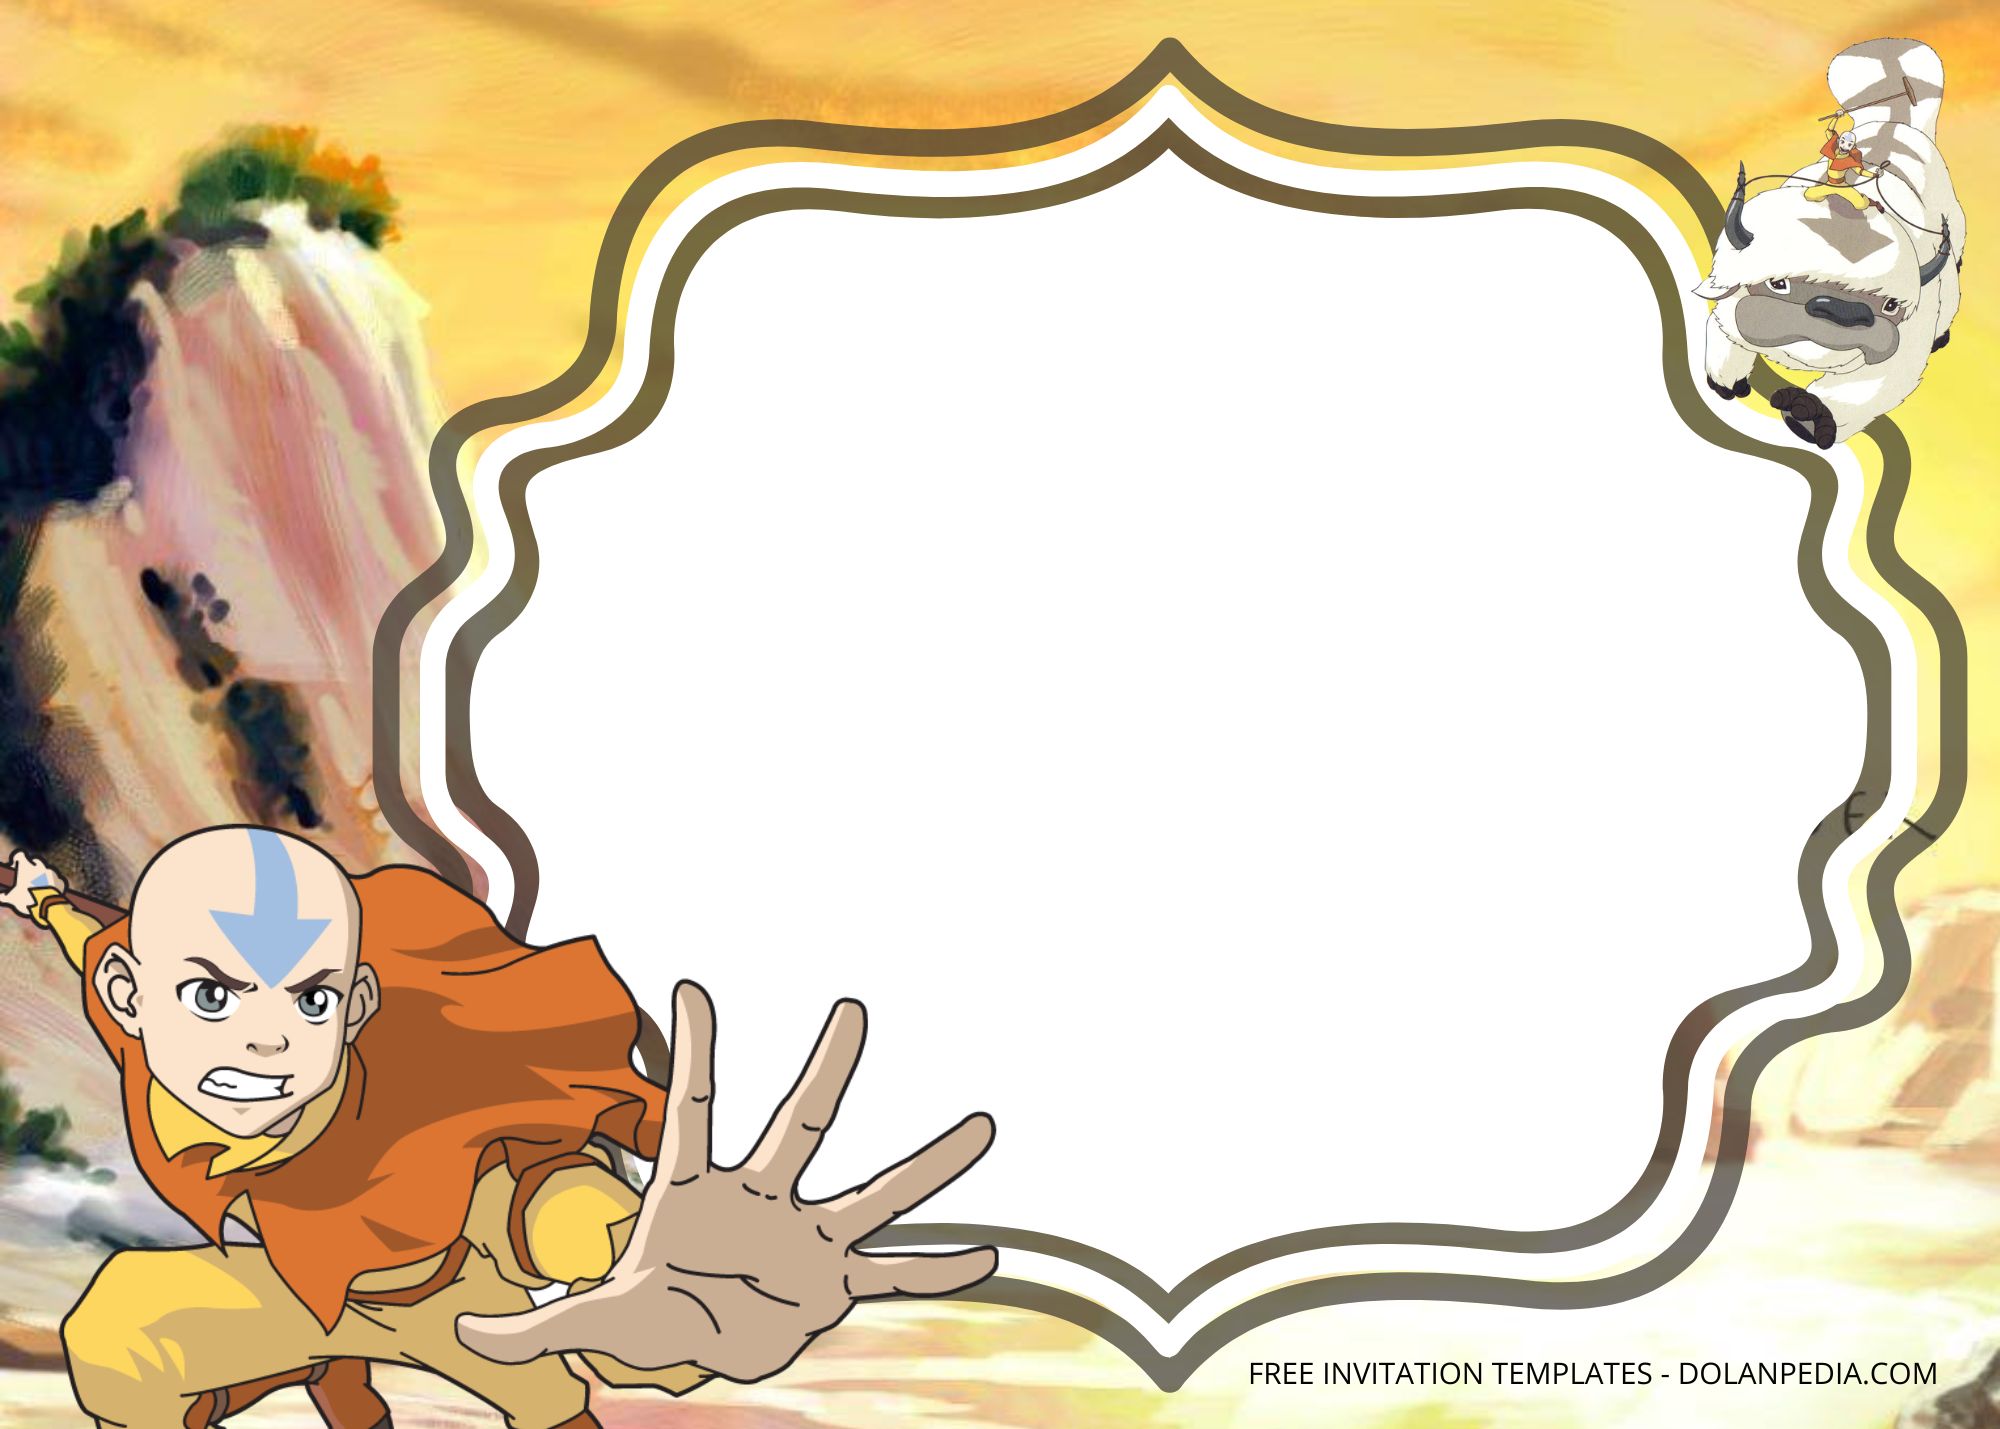 Blank Avatar The Legend of Aang Birthday Invitation Templates One